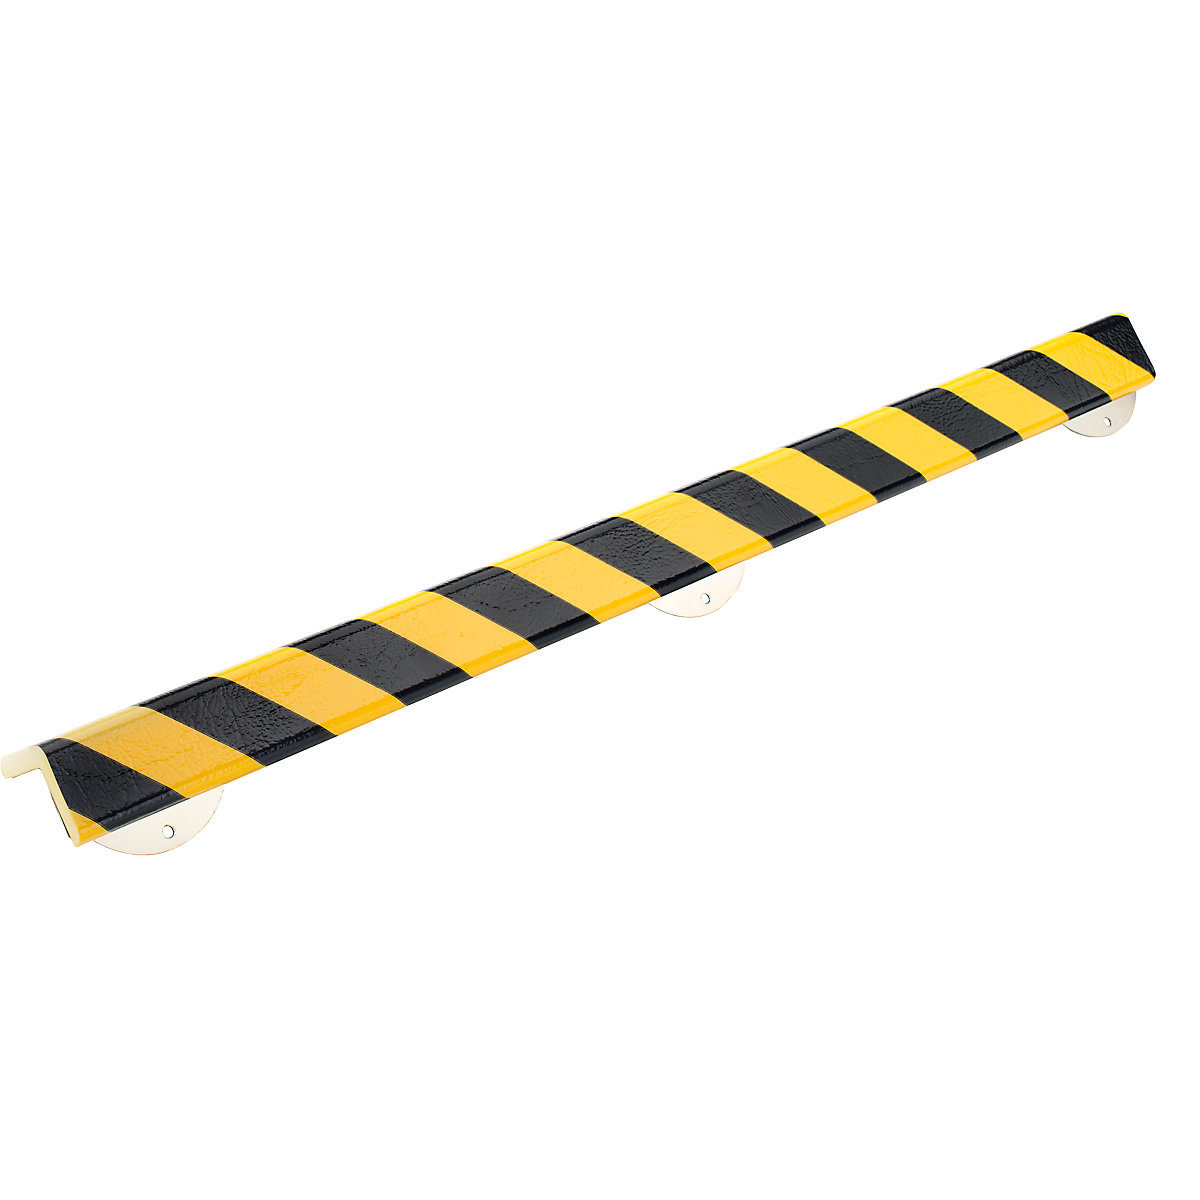 Knuffi® corner protection with mounting rail – SHG, type H+, 1 m piece, black / yellow-14